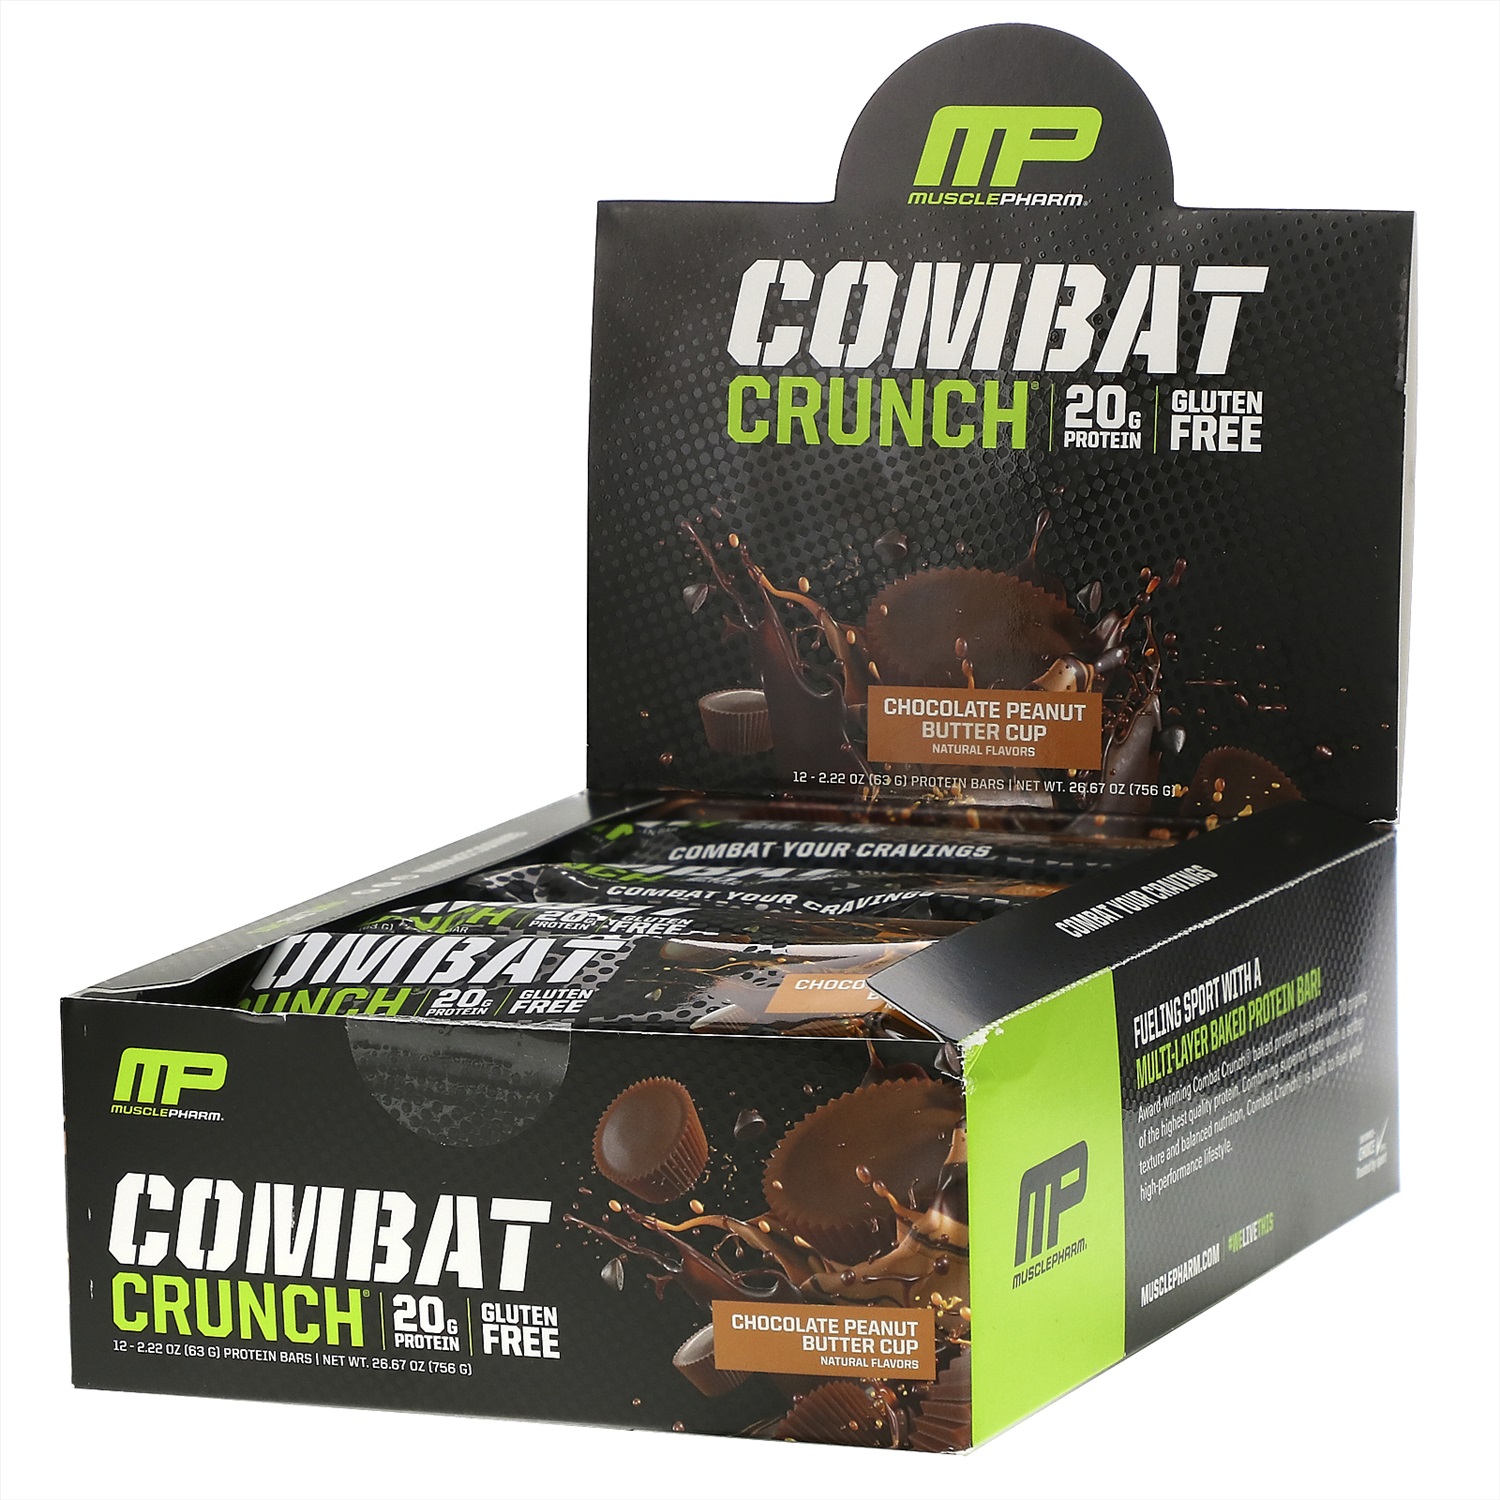 MusclePharm, Combat Crunch Protein Bars, Chocolate Peanut Butter Cup, 12 Ba...